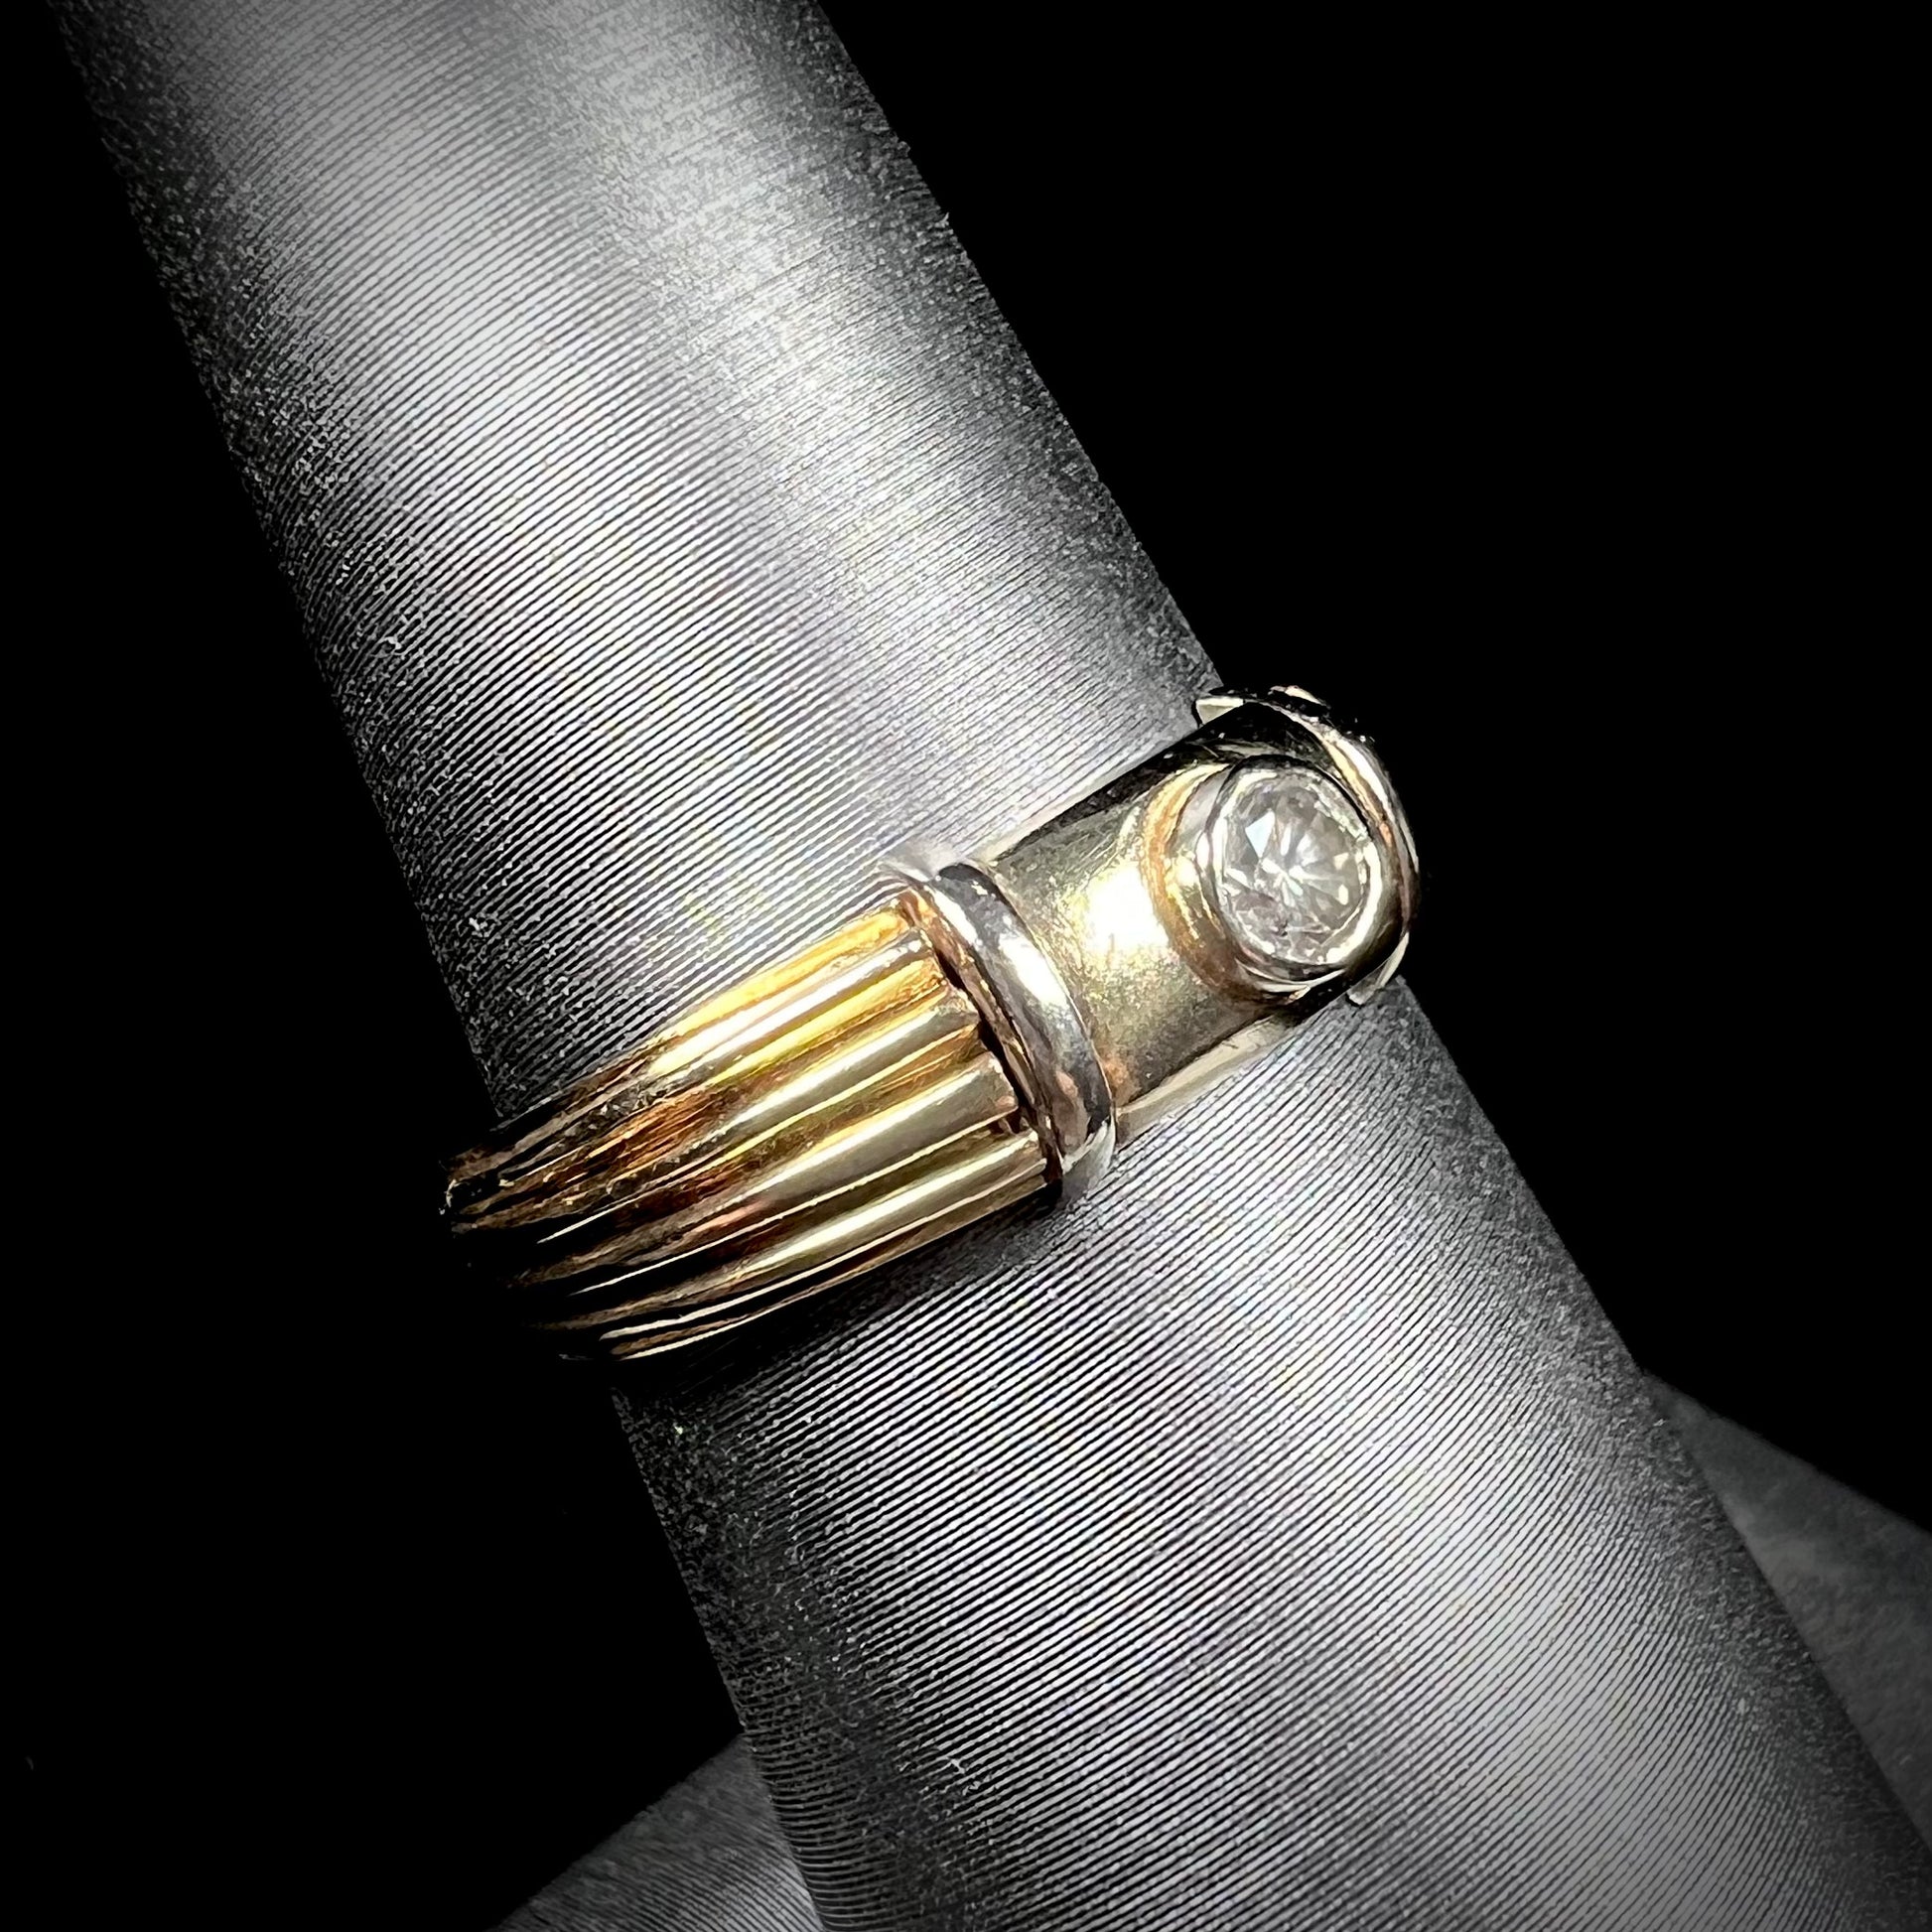 A unisex, vintage style two tone yellow and white gold wedding ring bezel set with a round diamond.